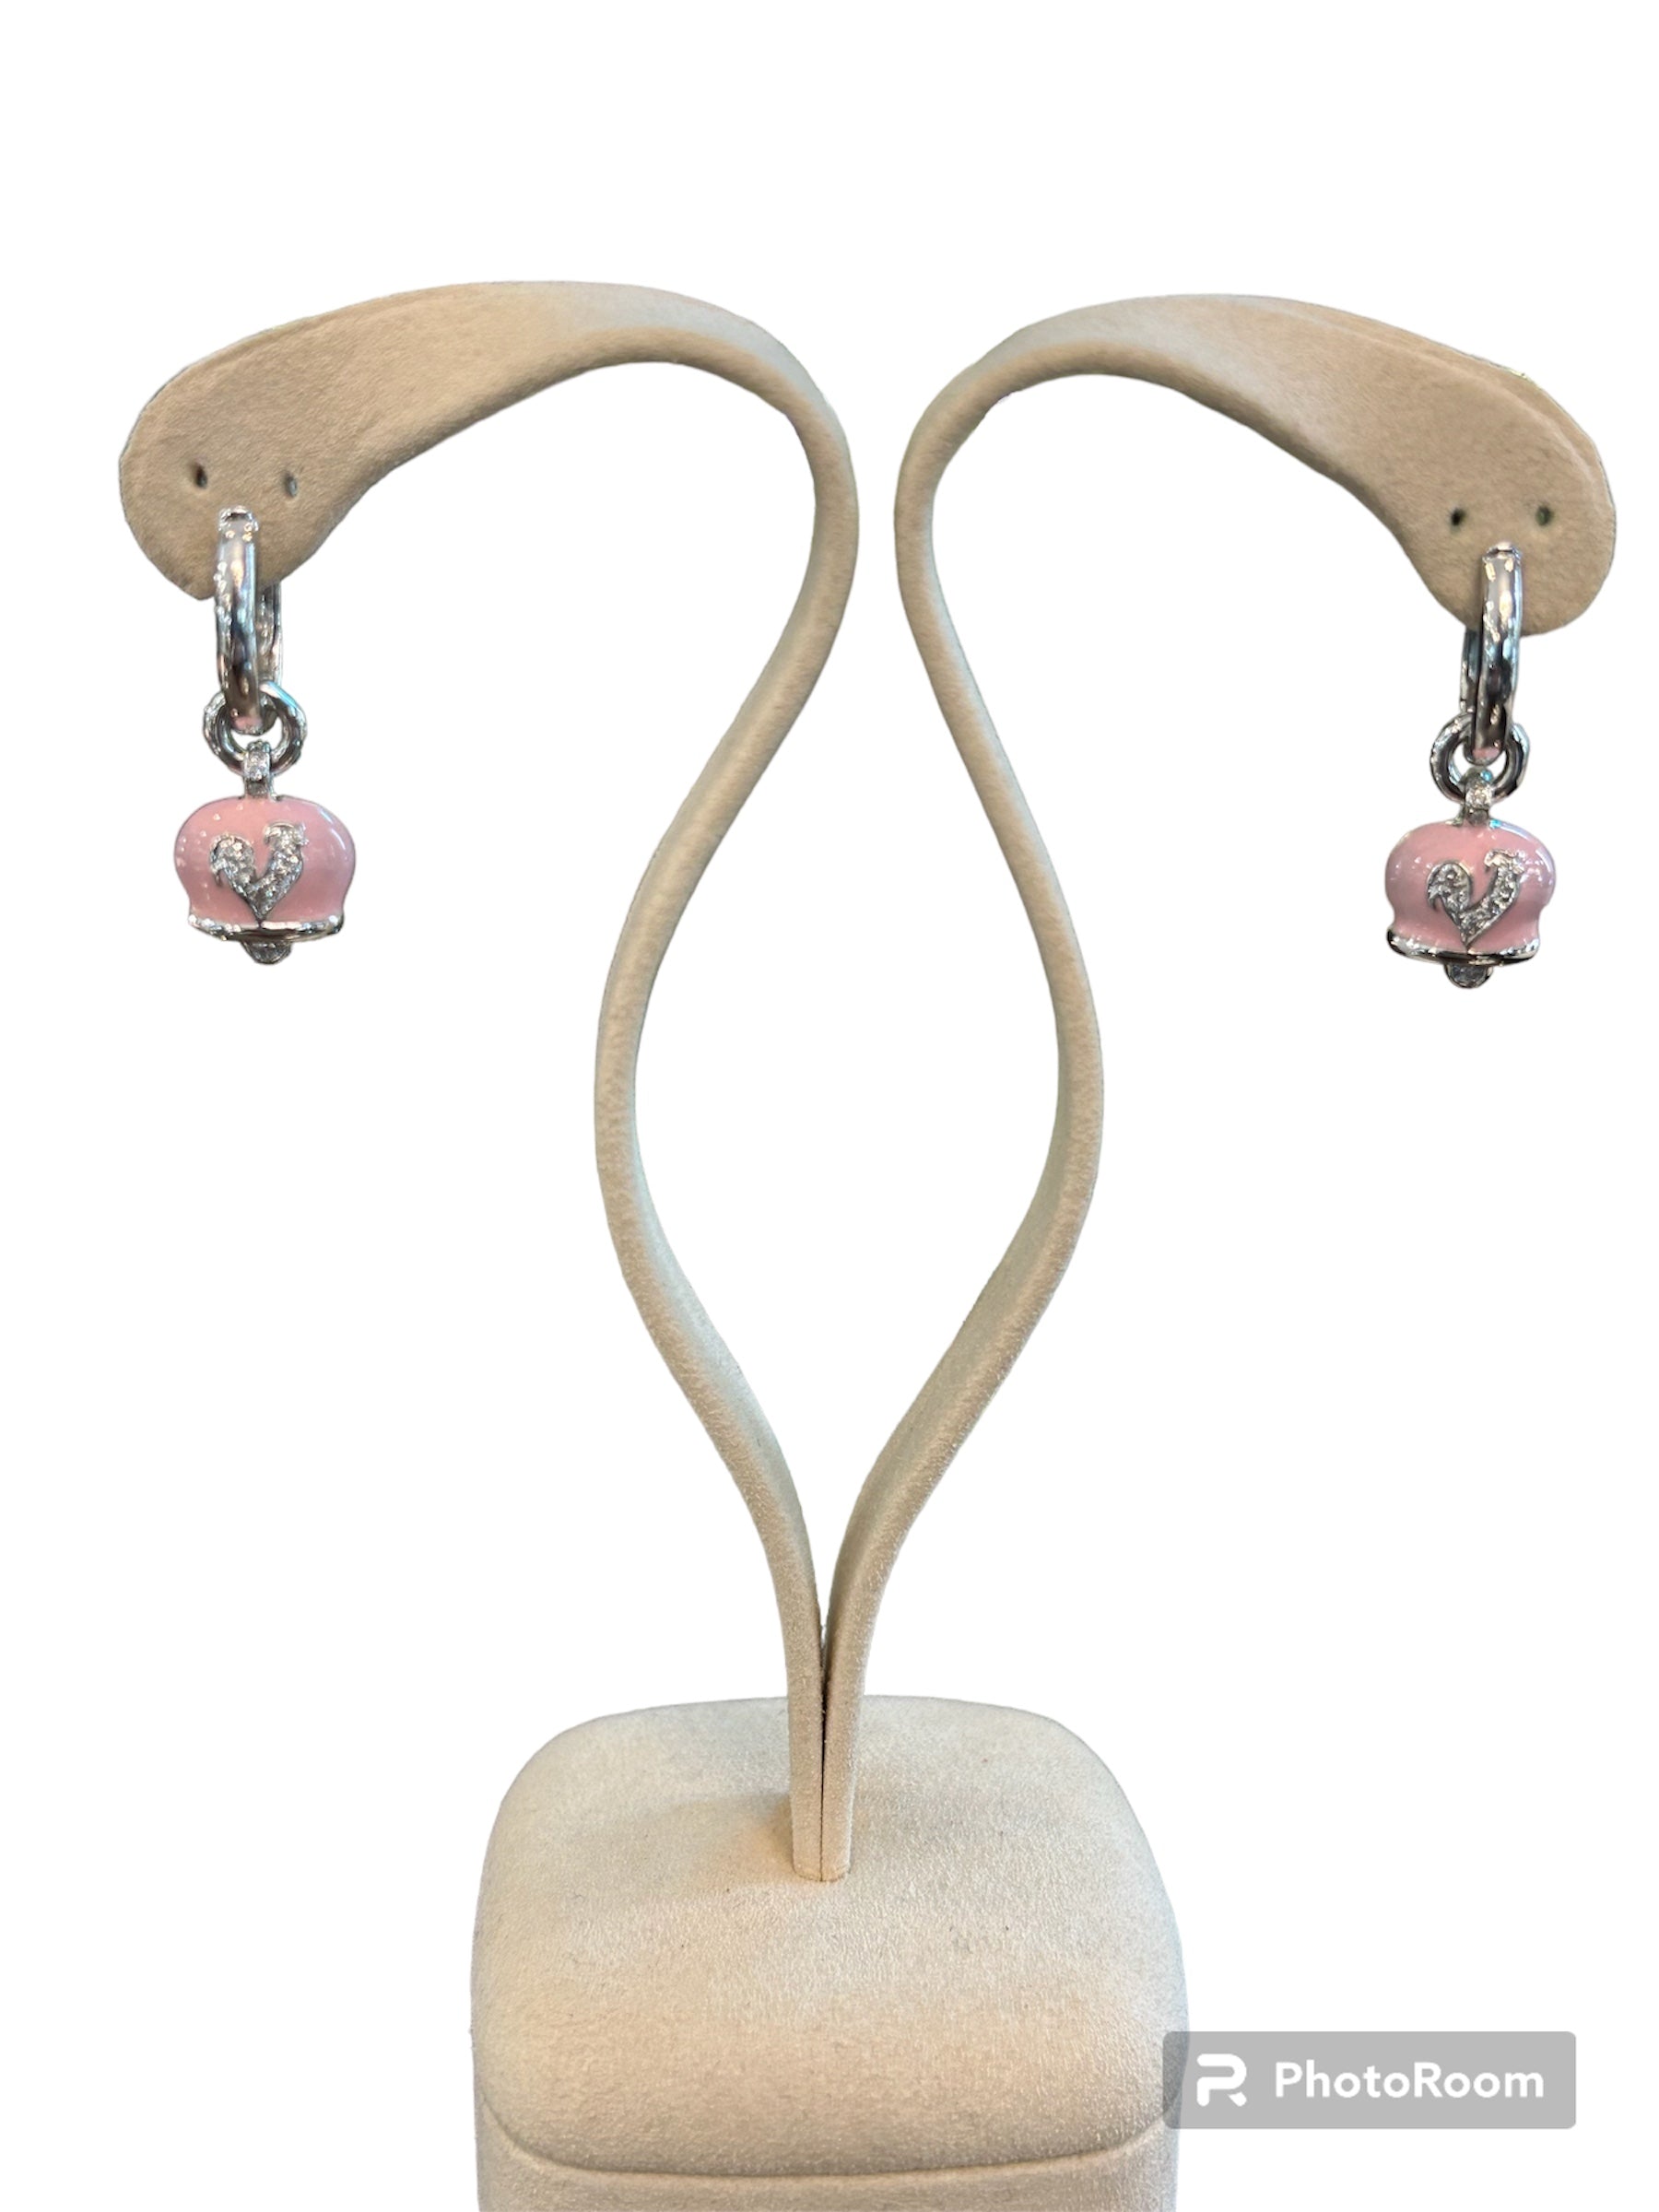 Campanella earrings in white gold, pink enamel and diamonds - 28711